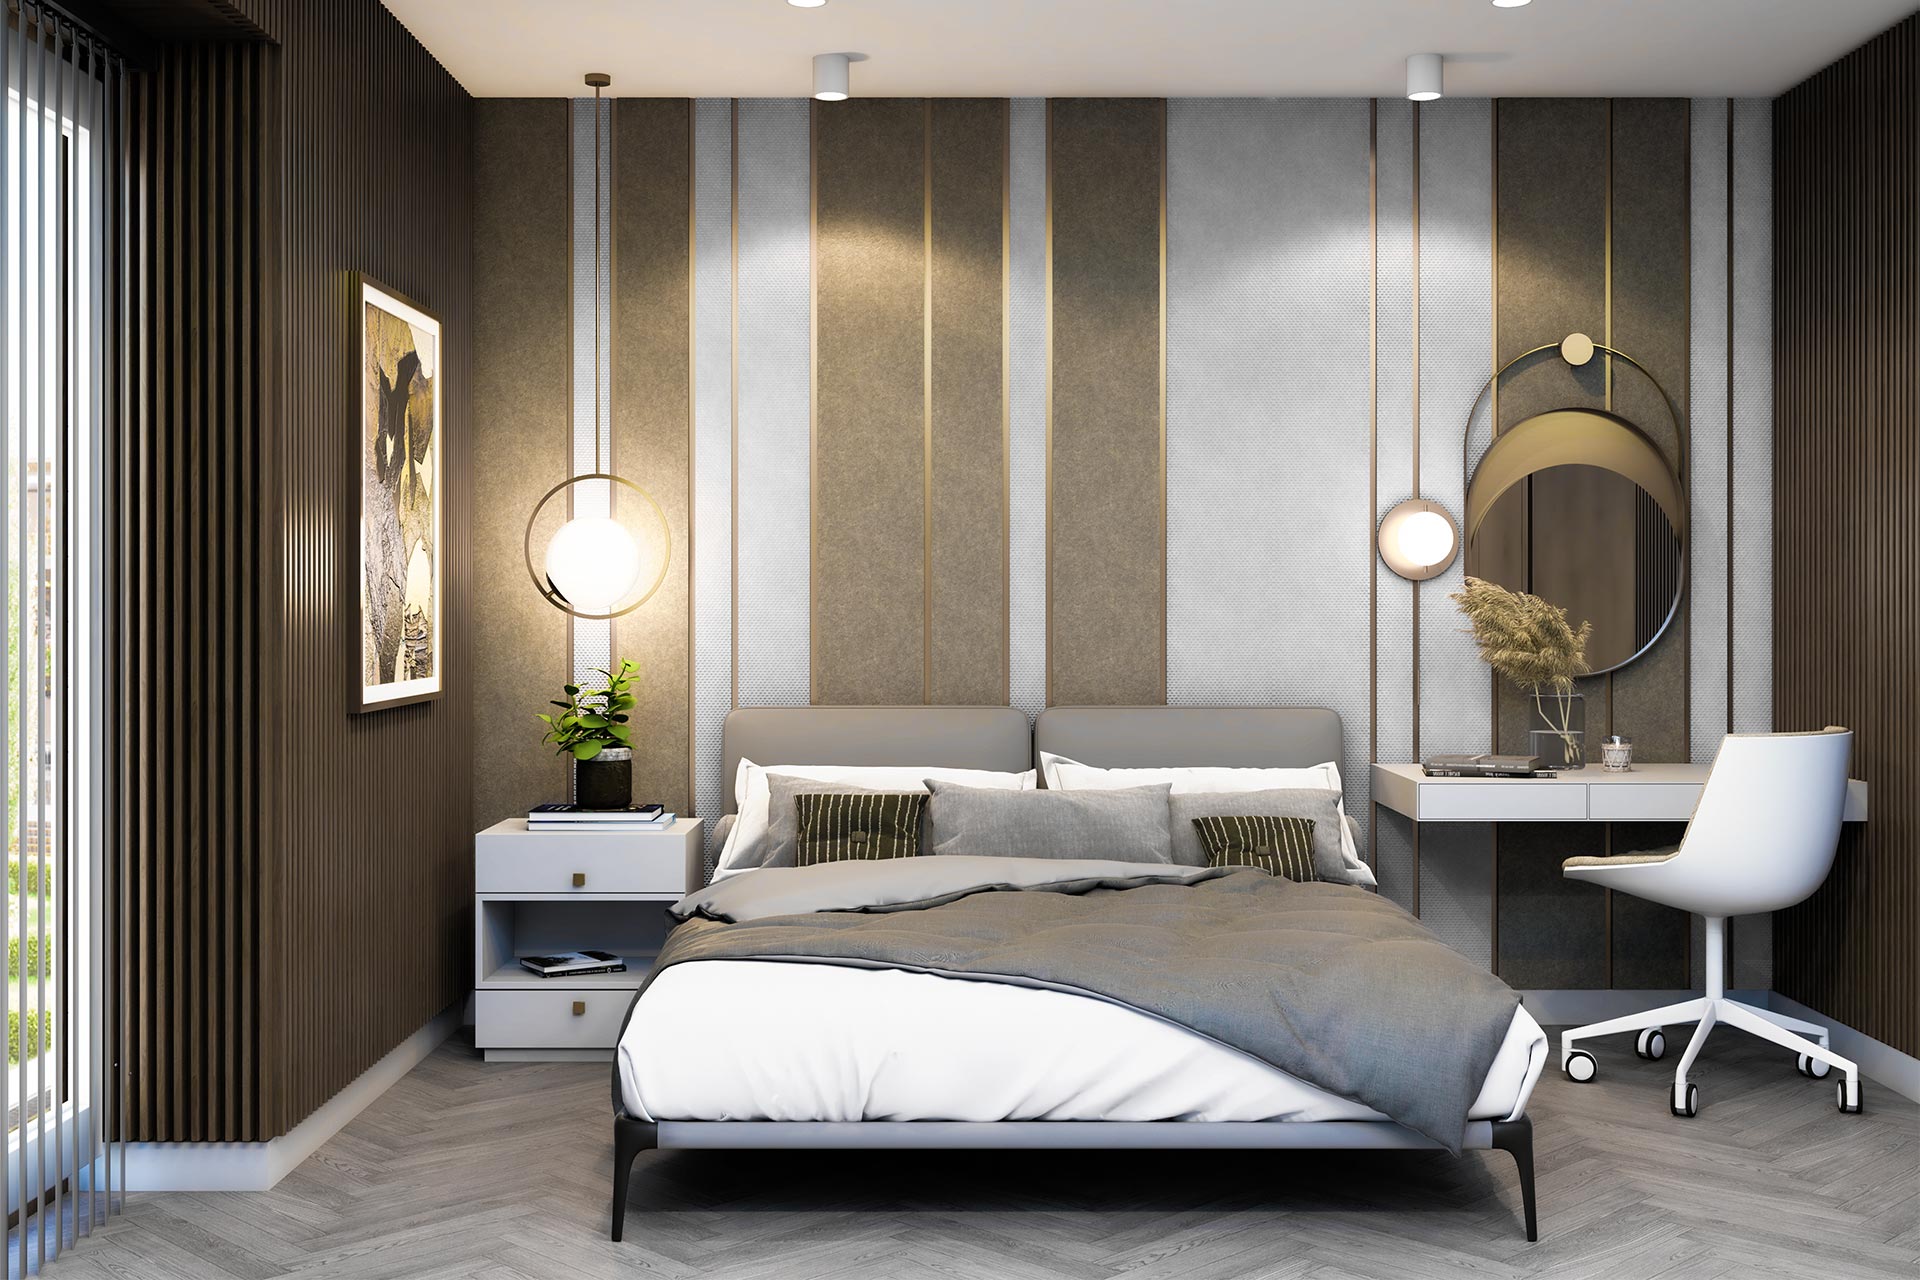 Composition of decorative sound-absorbing panels in bedroom